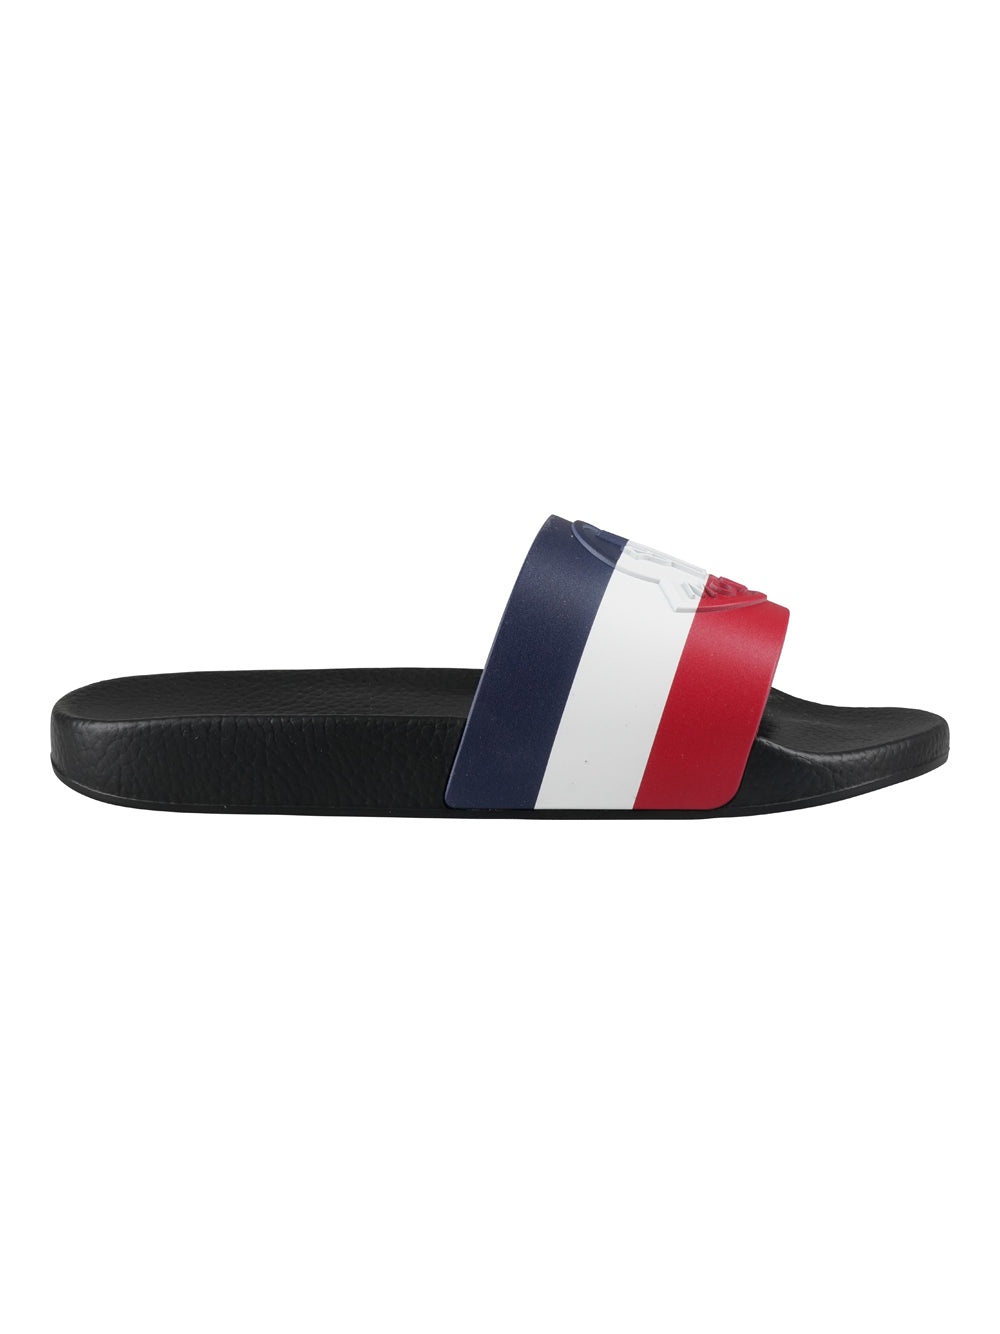 MONCLER MULTICOLOR SLIPPERS - 1